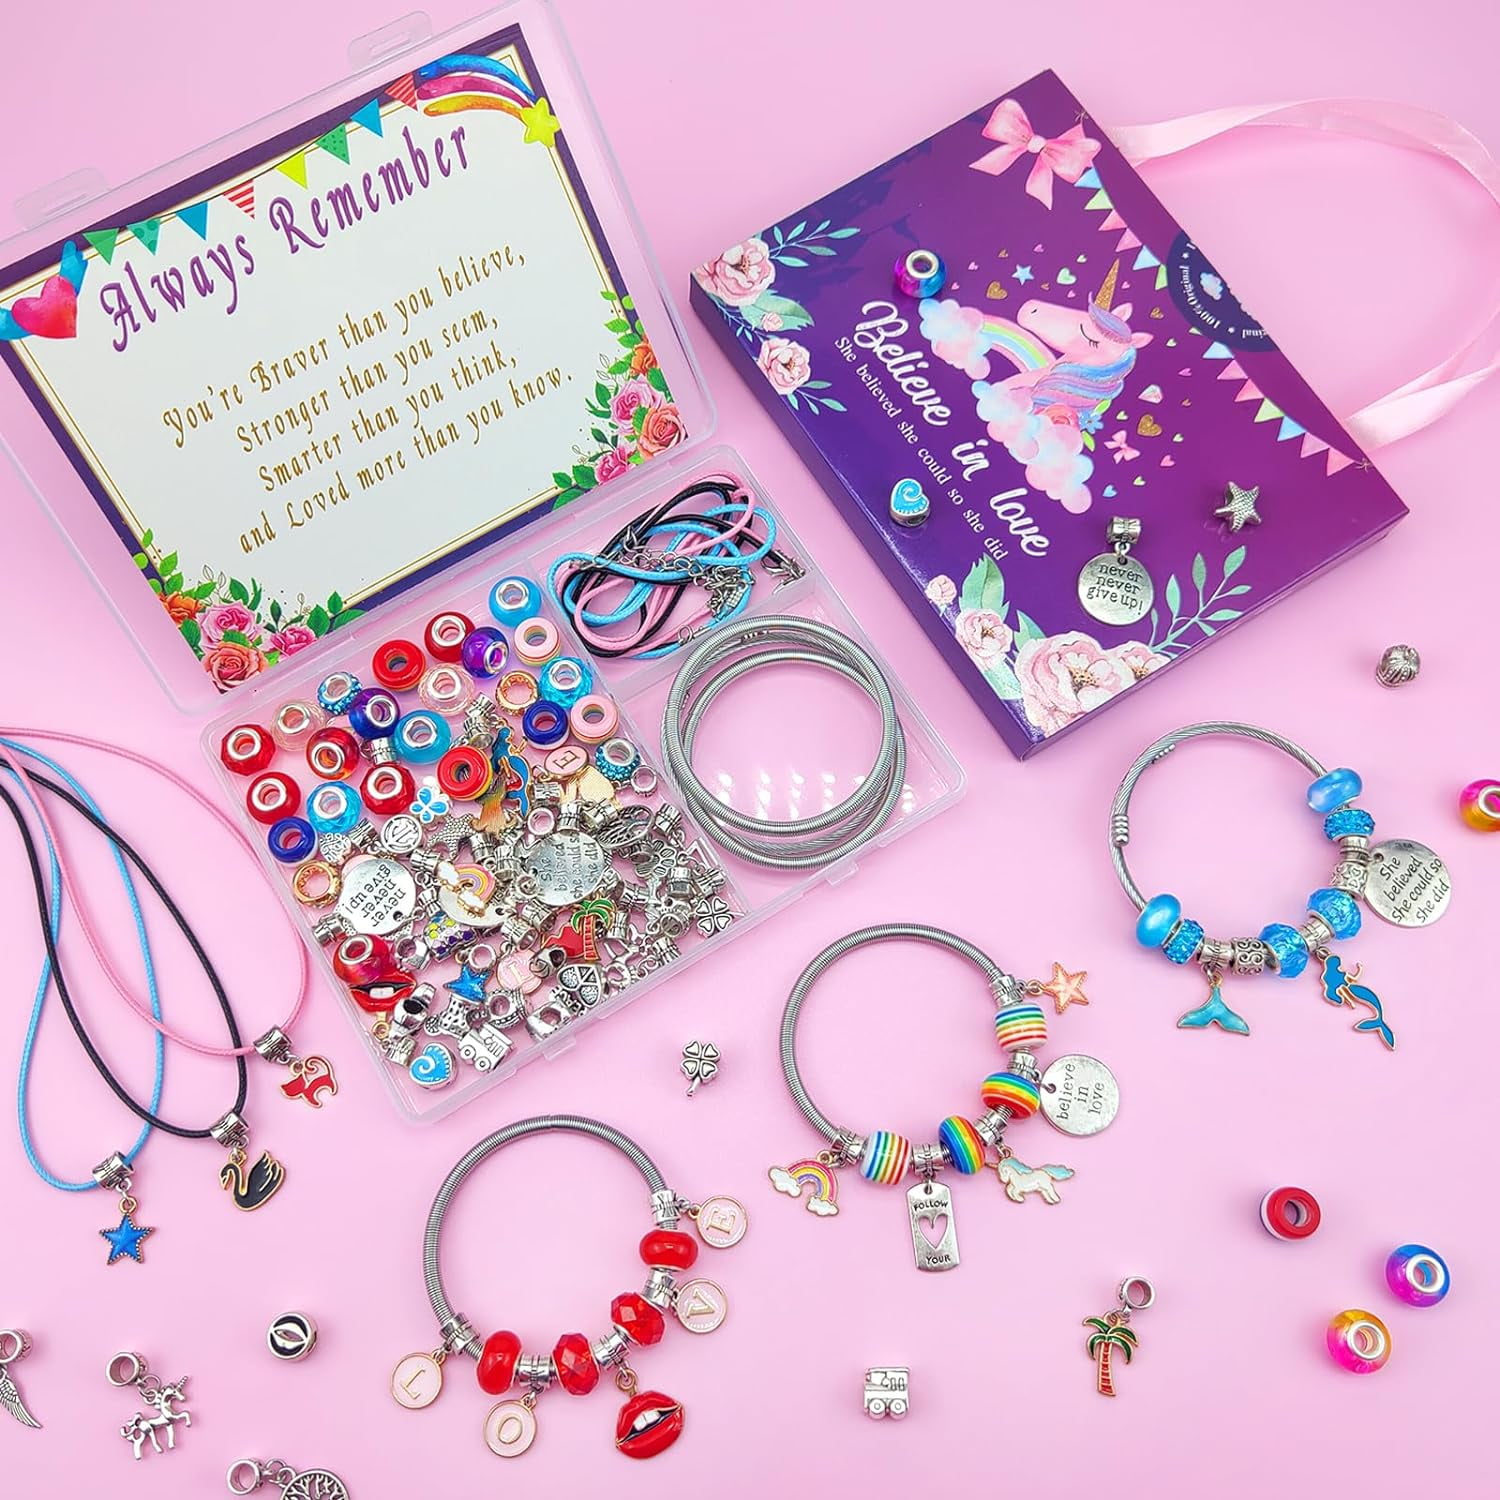  ZQFTZQ DIY Charm Bracelet Making Kit Unicorn/Mermaid Girl  Toy,Jewelry Making Kit Including Jewelry Beads,Snake Chains,Bead Bracelet  Kit, Arts and Crafts for Kids Christmas Toys : Toys & Games